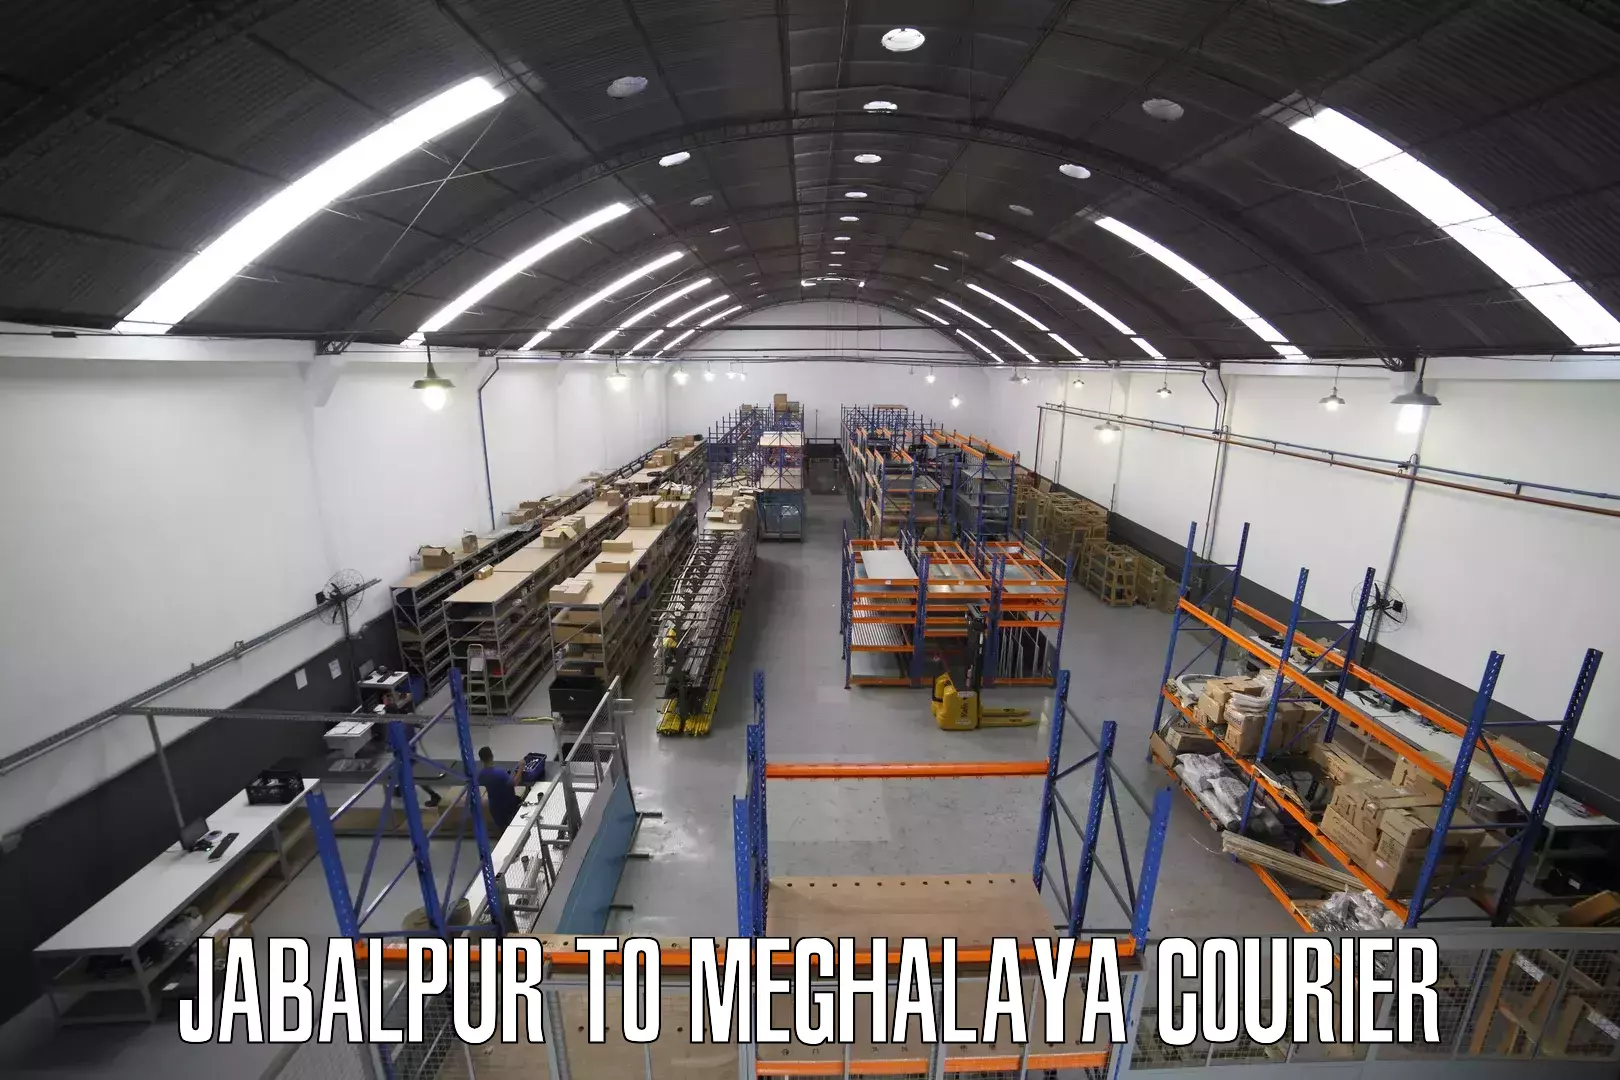 State-of-the-art courier technology Jabalpur to Shillong